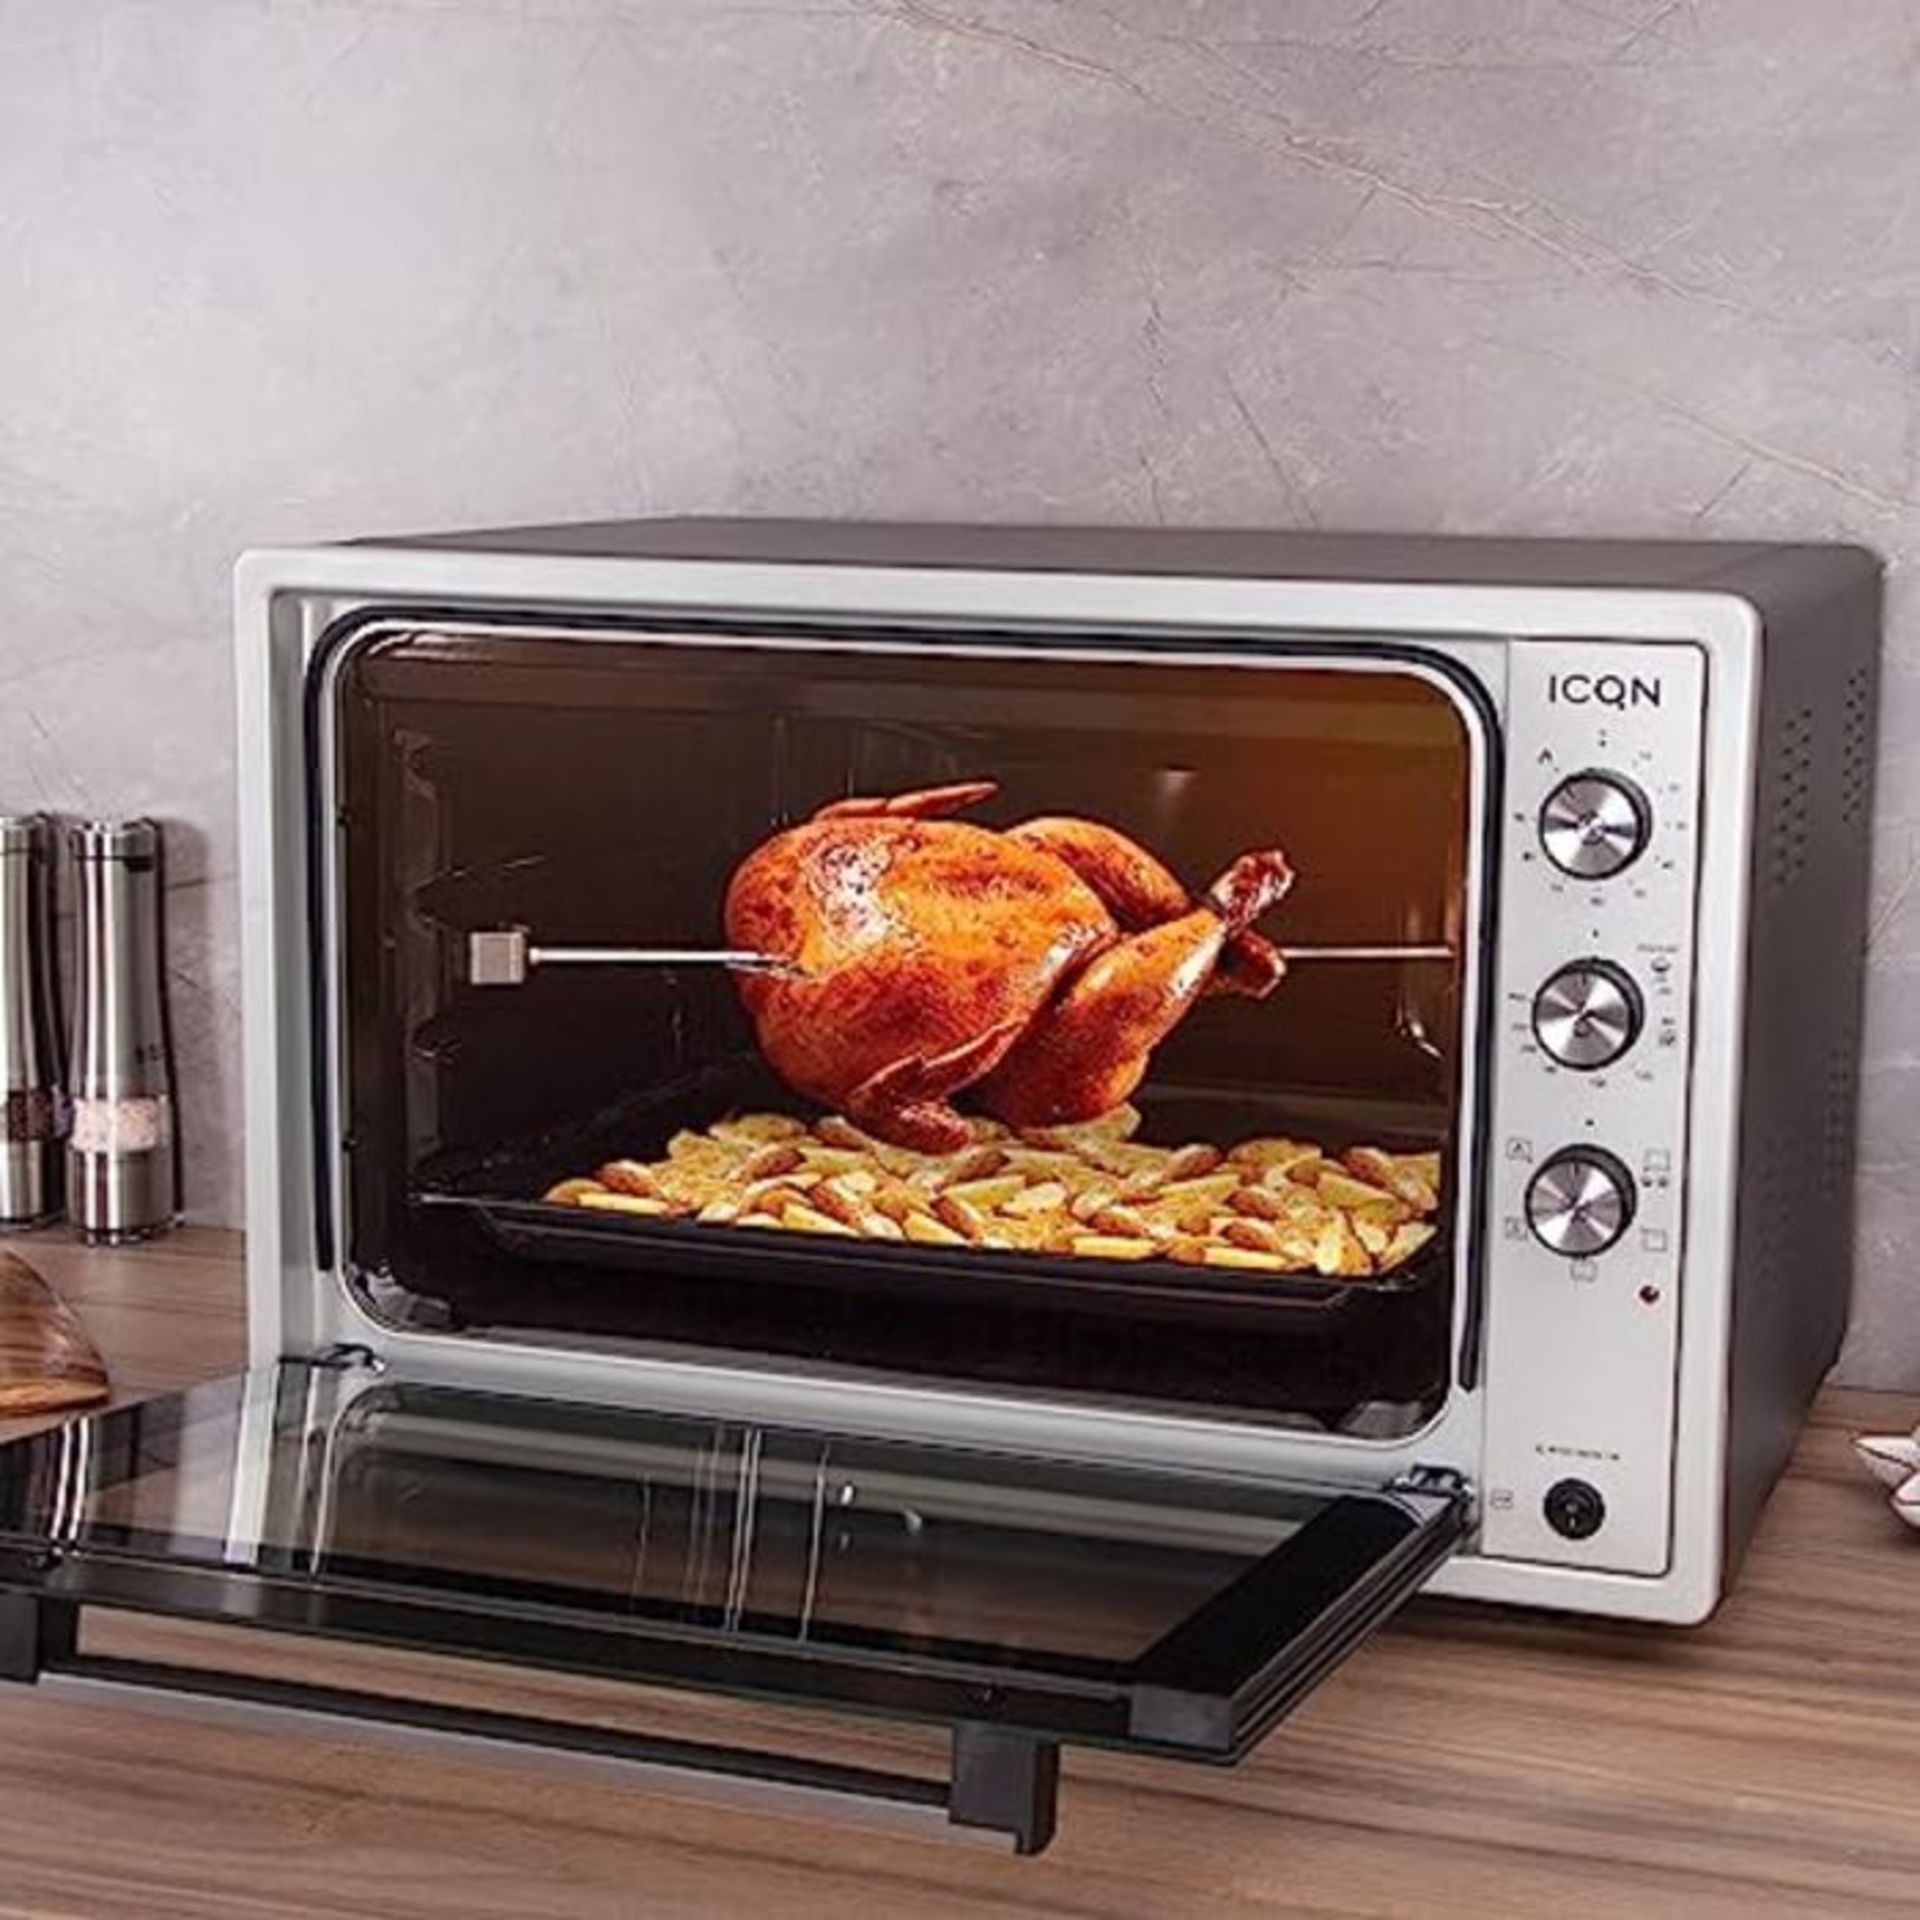 RRP £129.00 ICQN 60 liter XXL Mini Oven | 1800 W | Circulating Air | Pizza Oven | Double glazing |